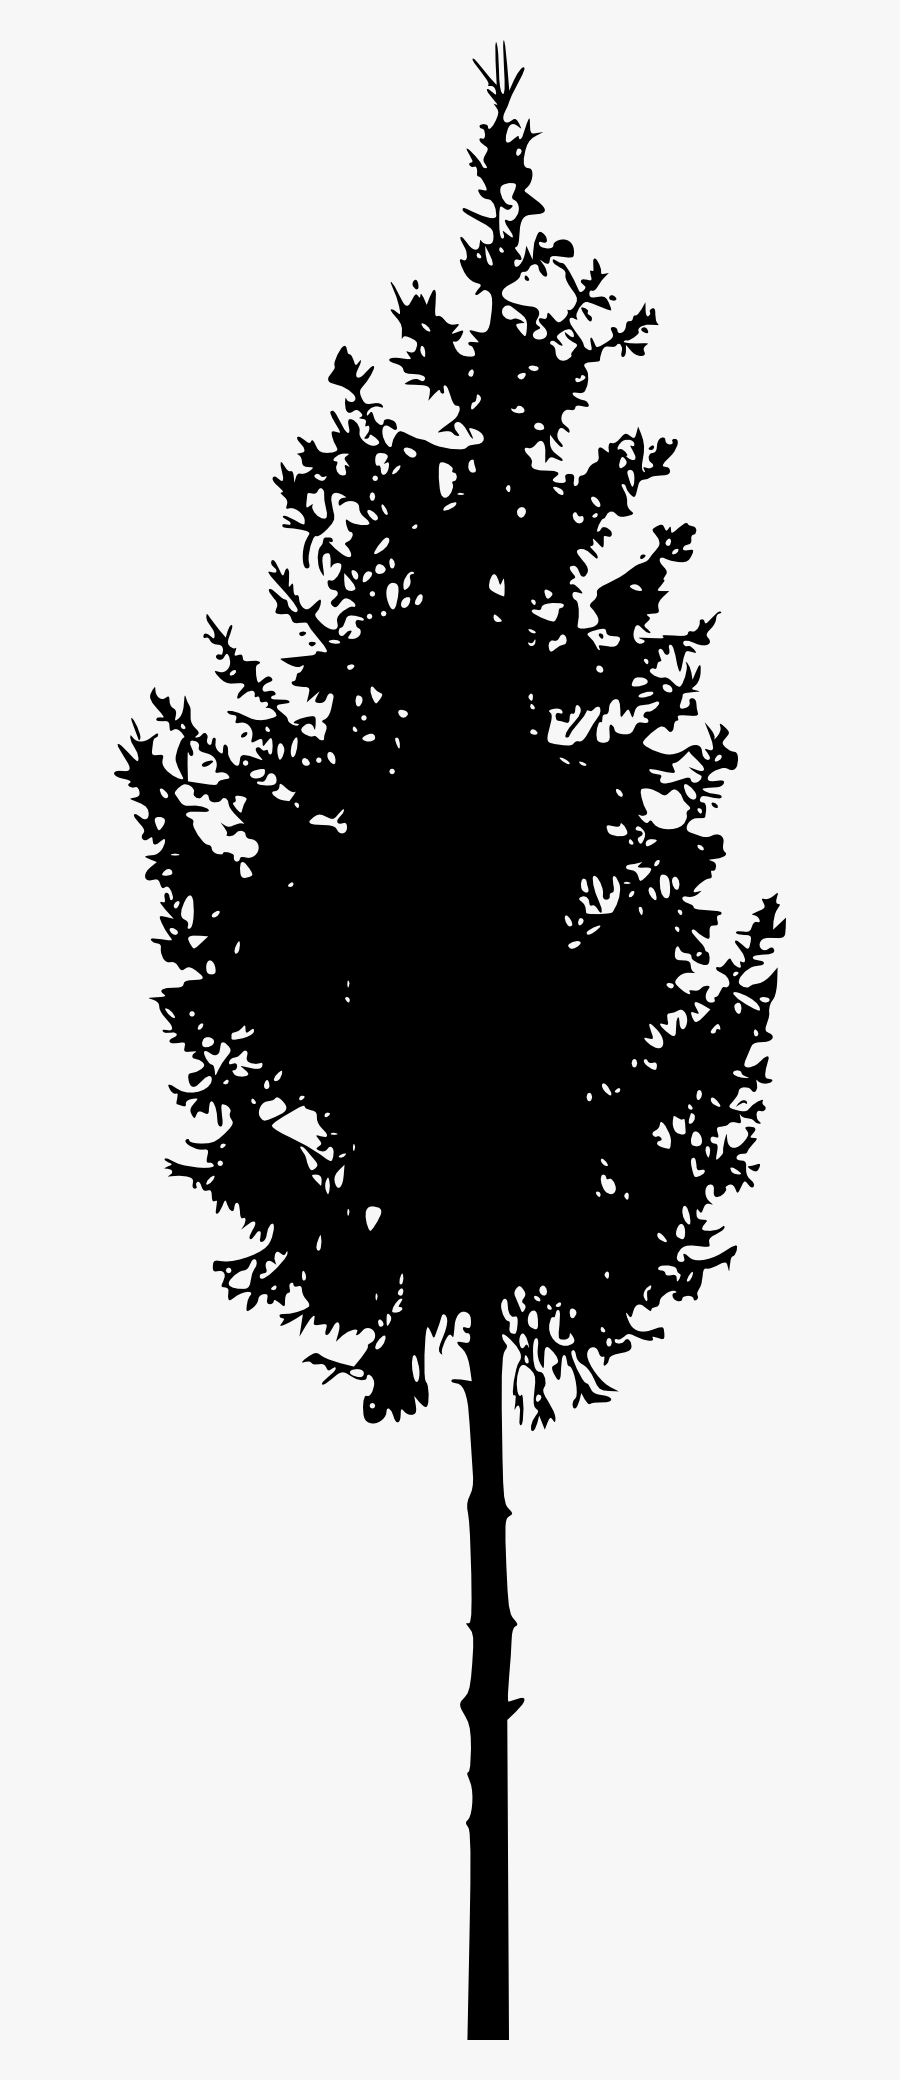 Tree Silhouette 2 - Portable Network Graphics, Transparent Clipart